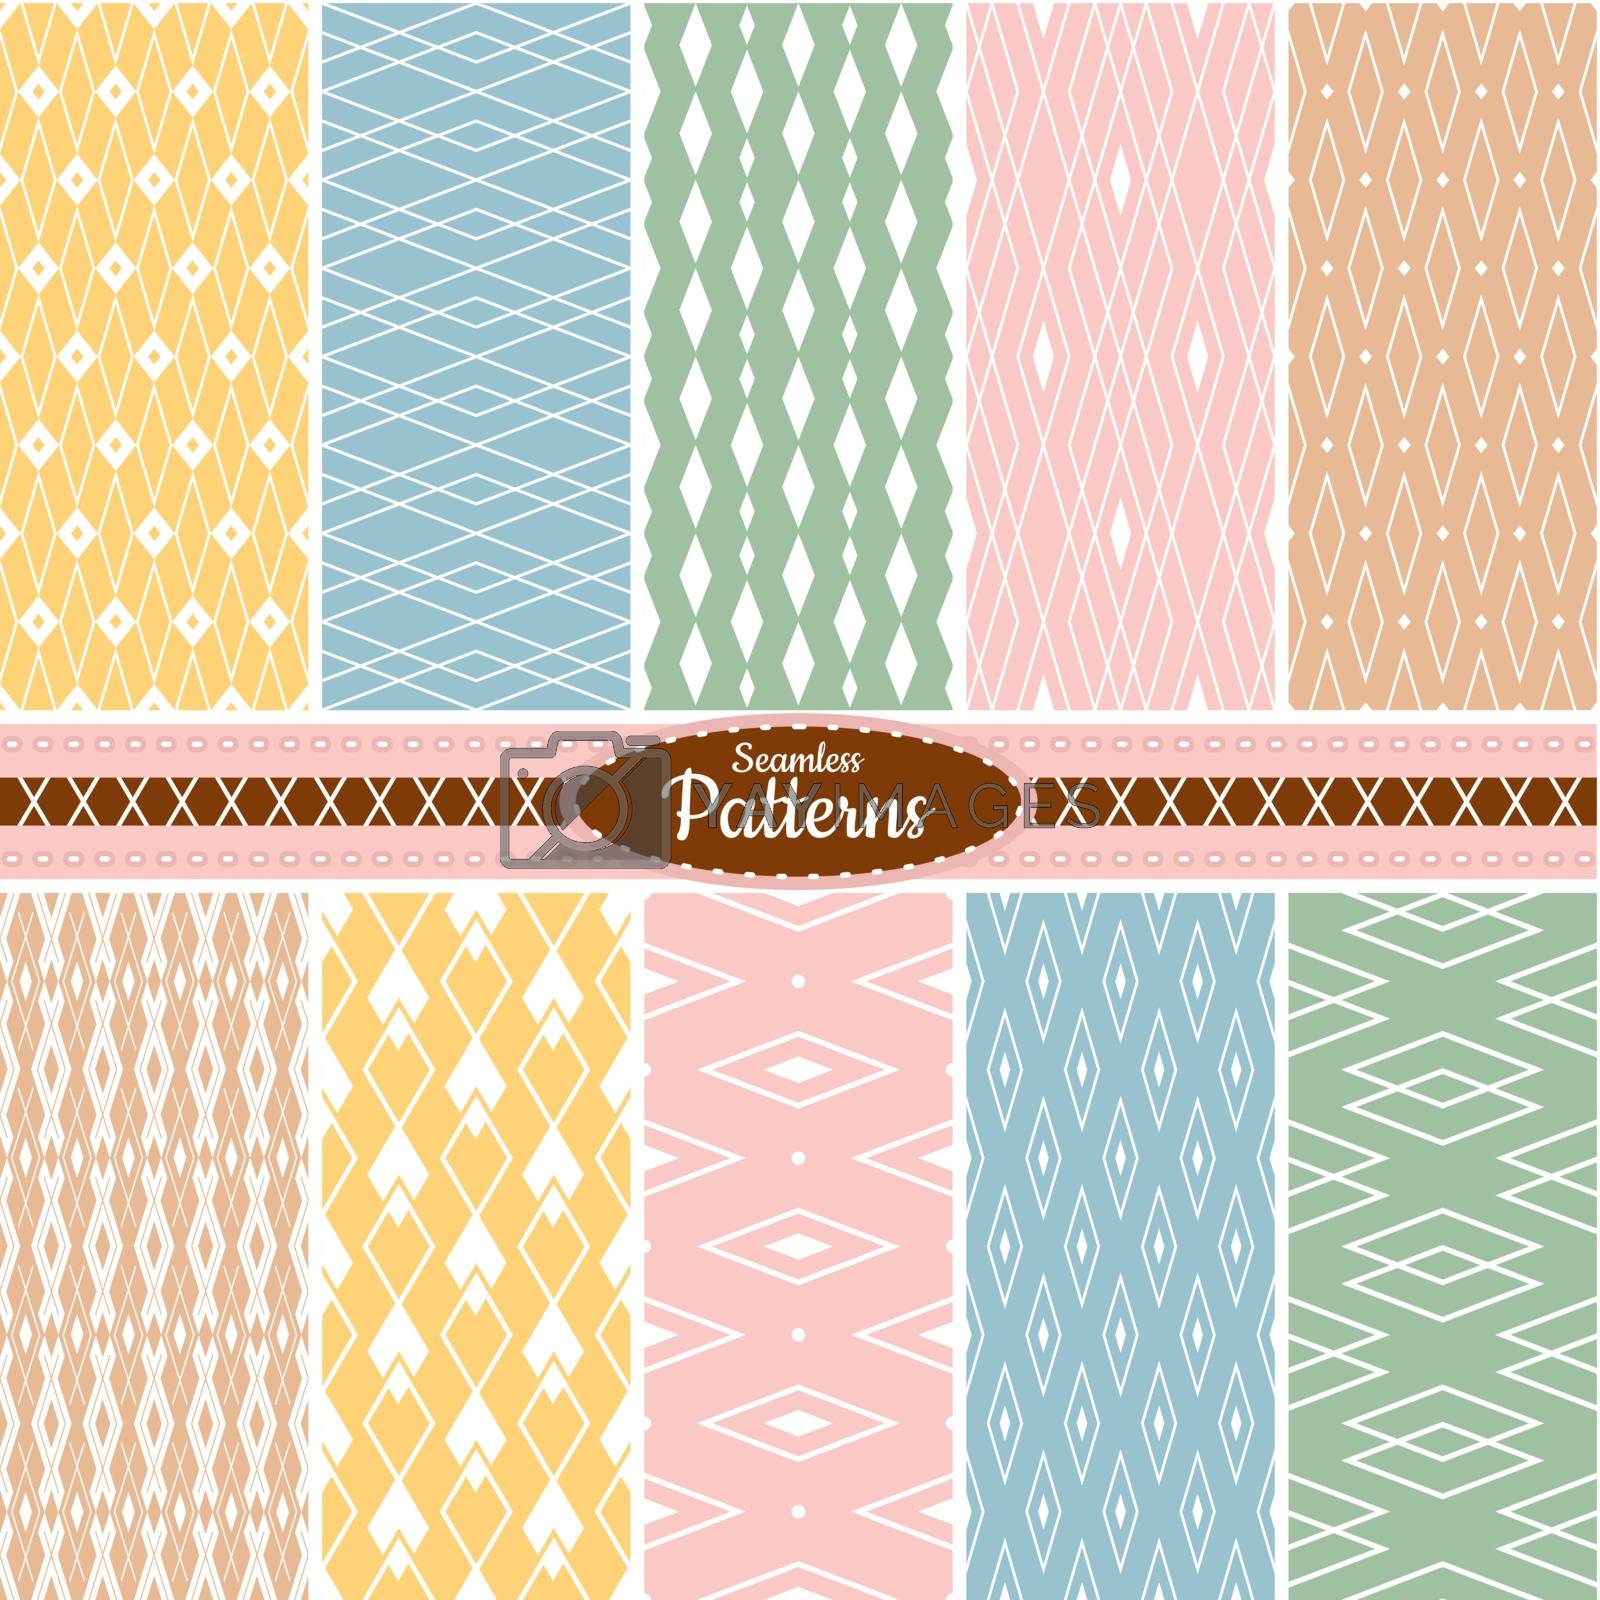 Collection of 10 geometric colorful seamless pattern background. Great for web page backgrounds, wallpapers, interiors, home decor, apparel, etc. Vector file includes pattern swatch for each pattern.